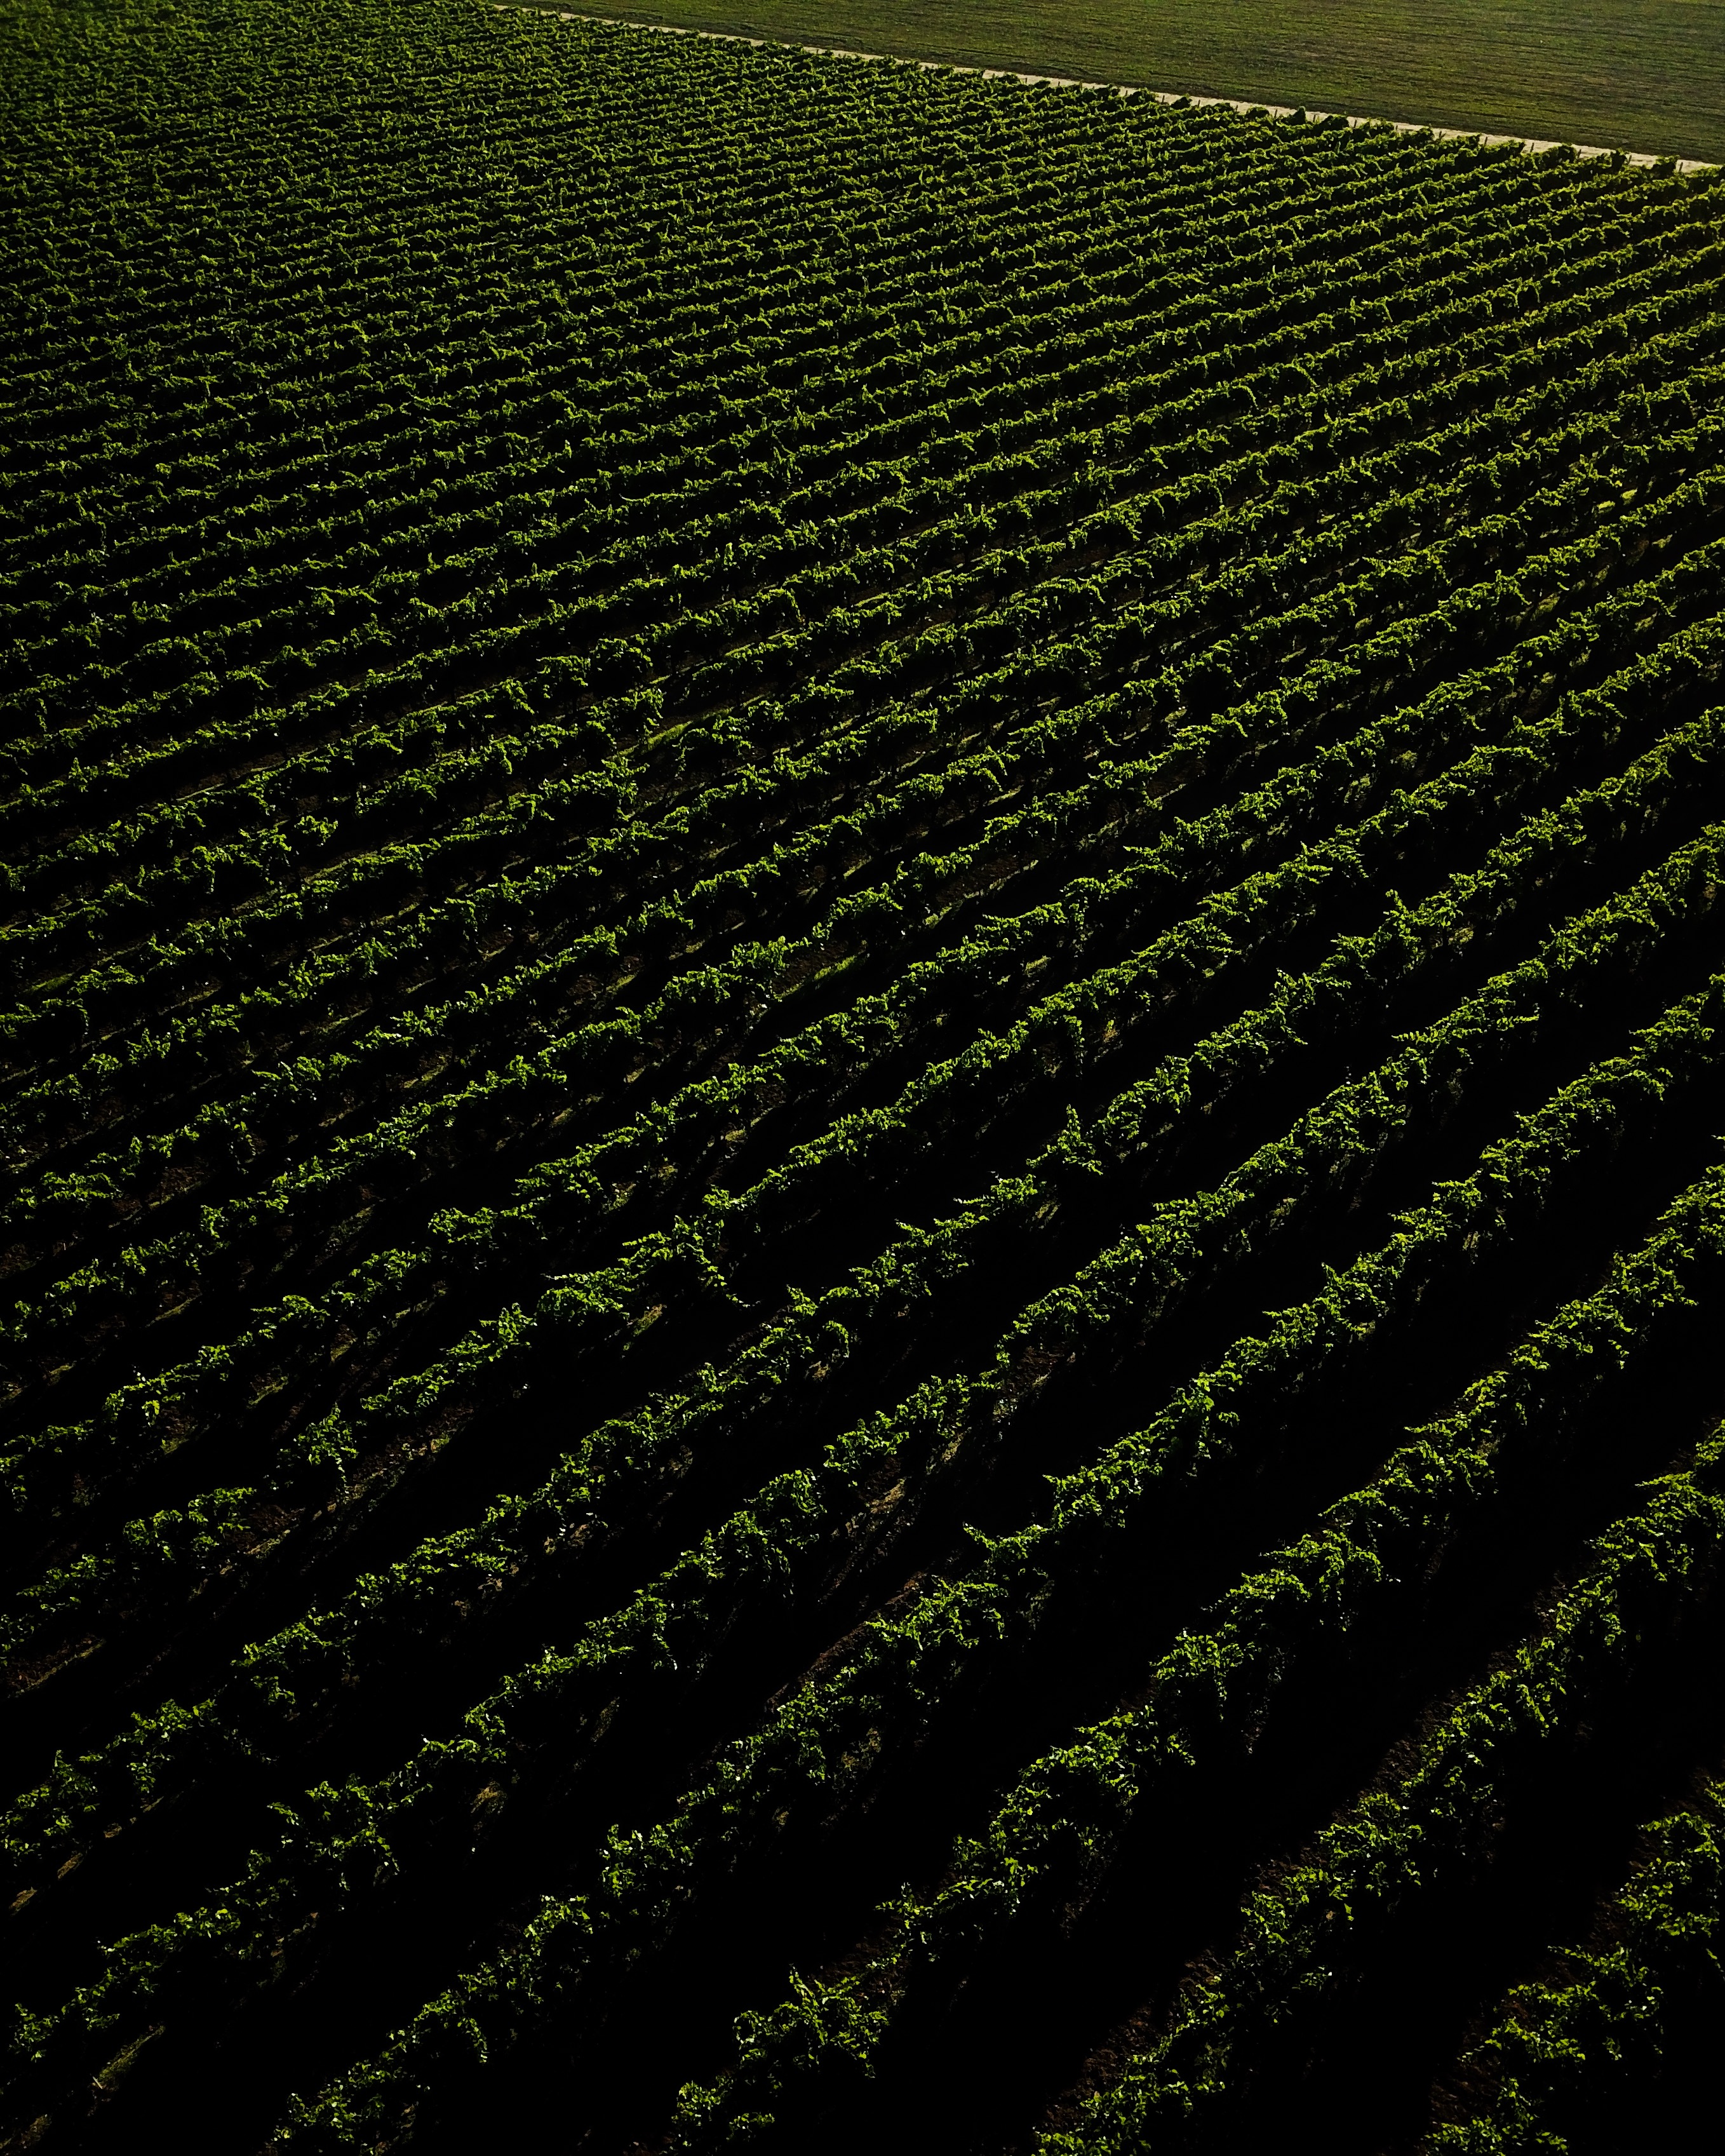 An aerial view of grapevines west of Fresno, California